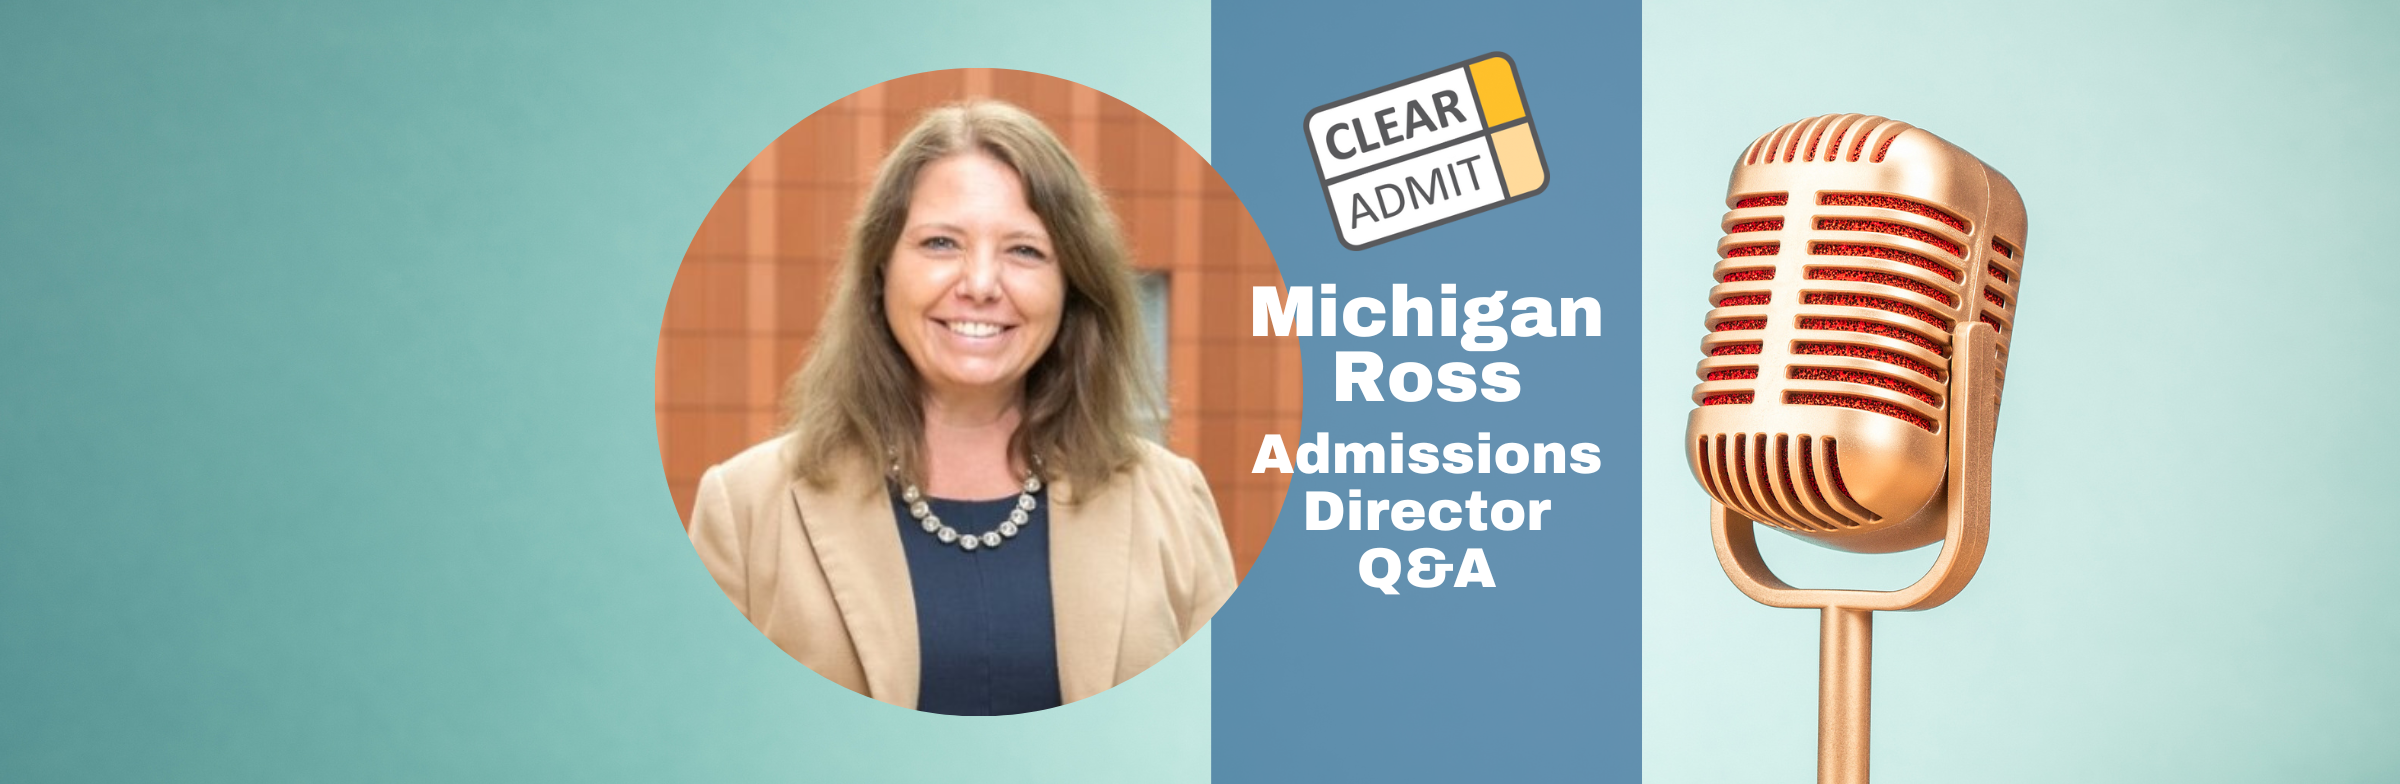 Image for Admissions Director Q&A: Taya Sapp of Michigan Ross